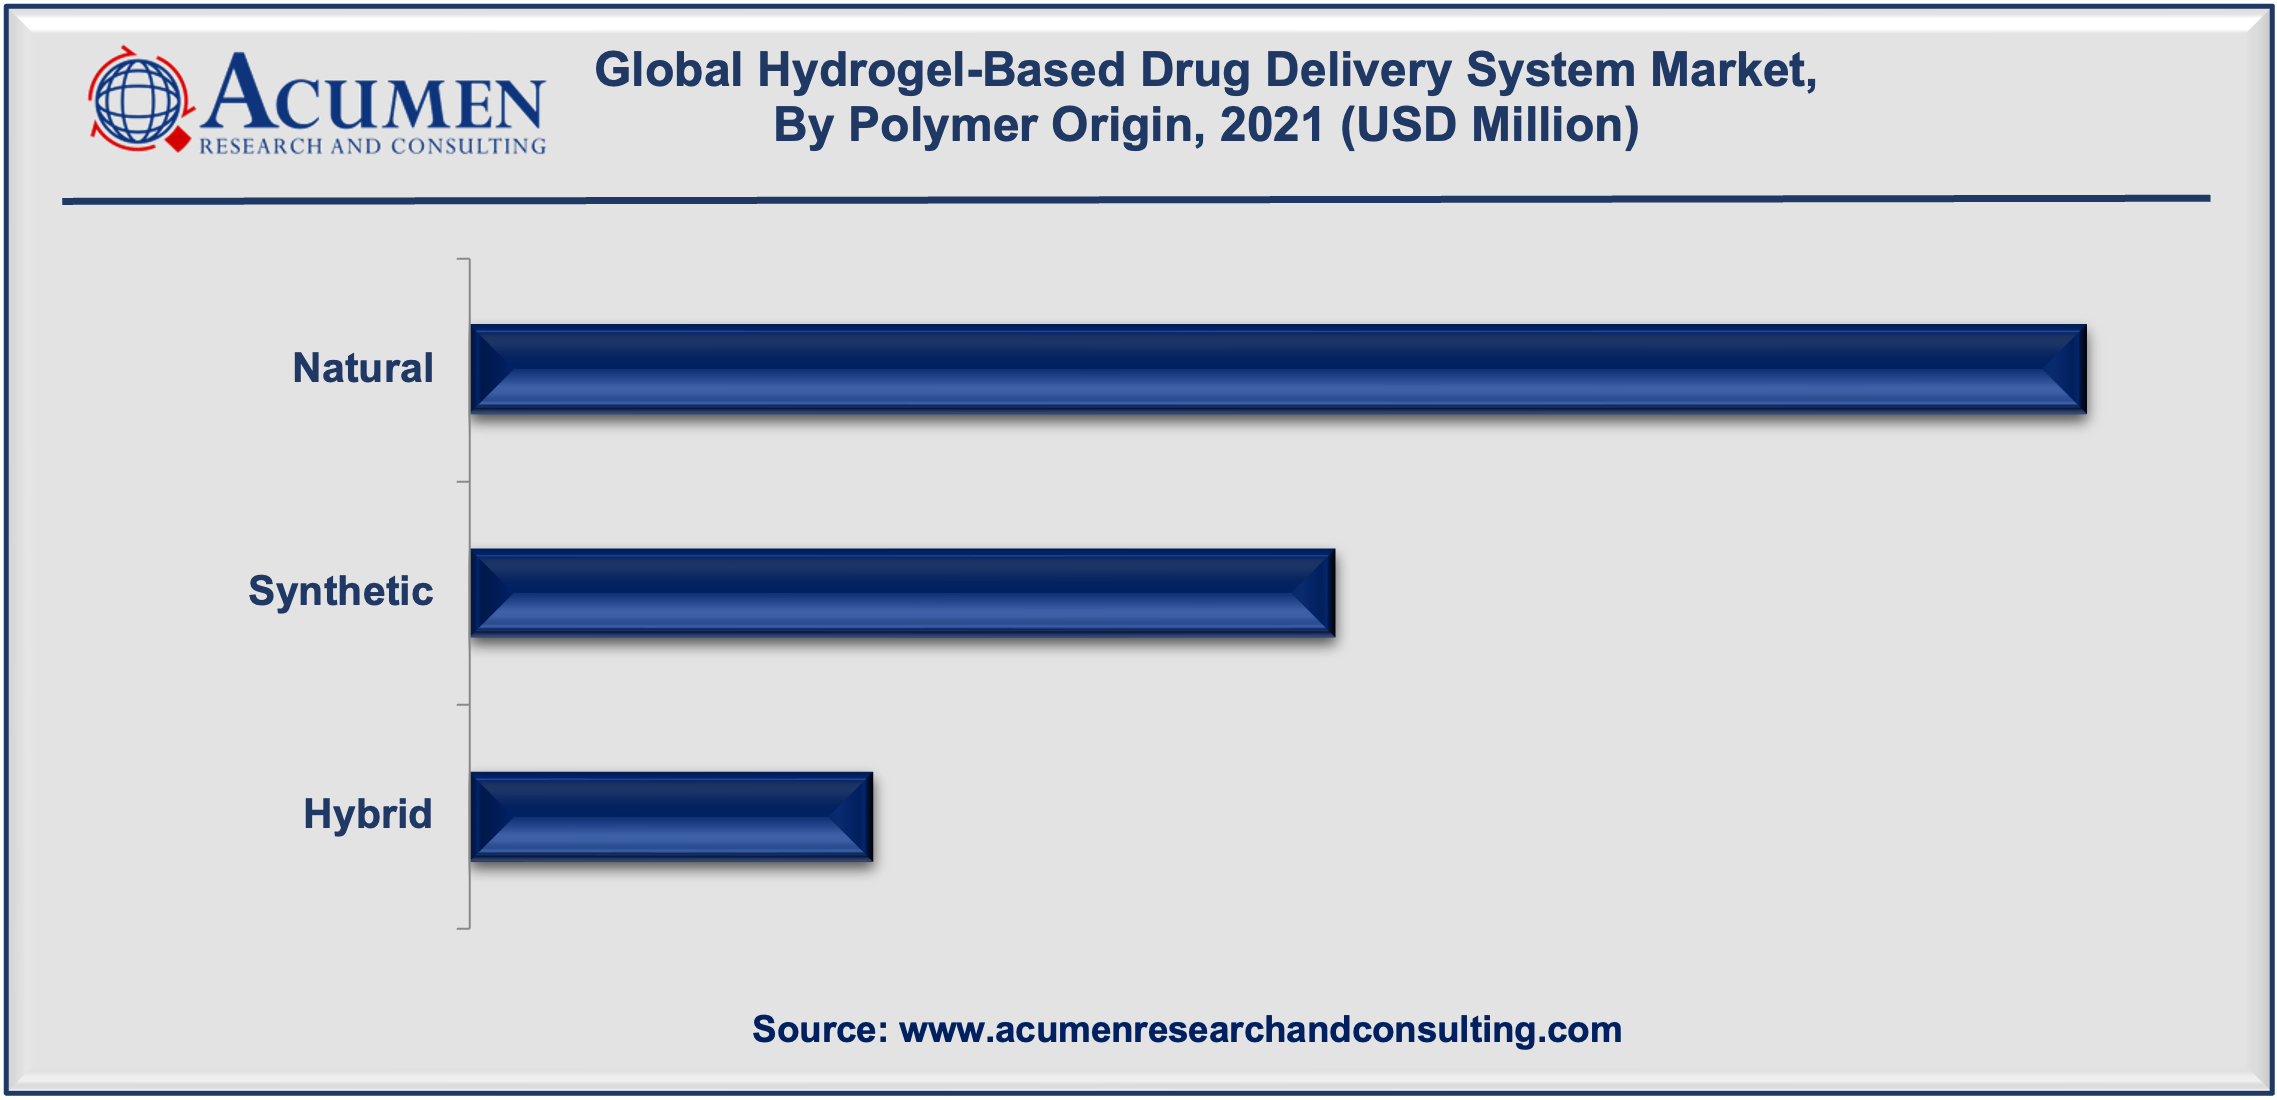 Hydrogel-Based Drug Delivery System Market Size is estimated to reach USD 12,357 Mn by 2030, with a CAGR of 7.6%